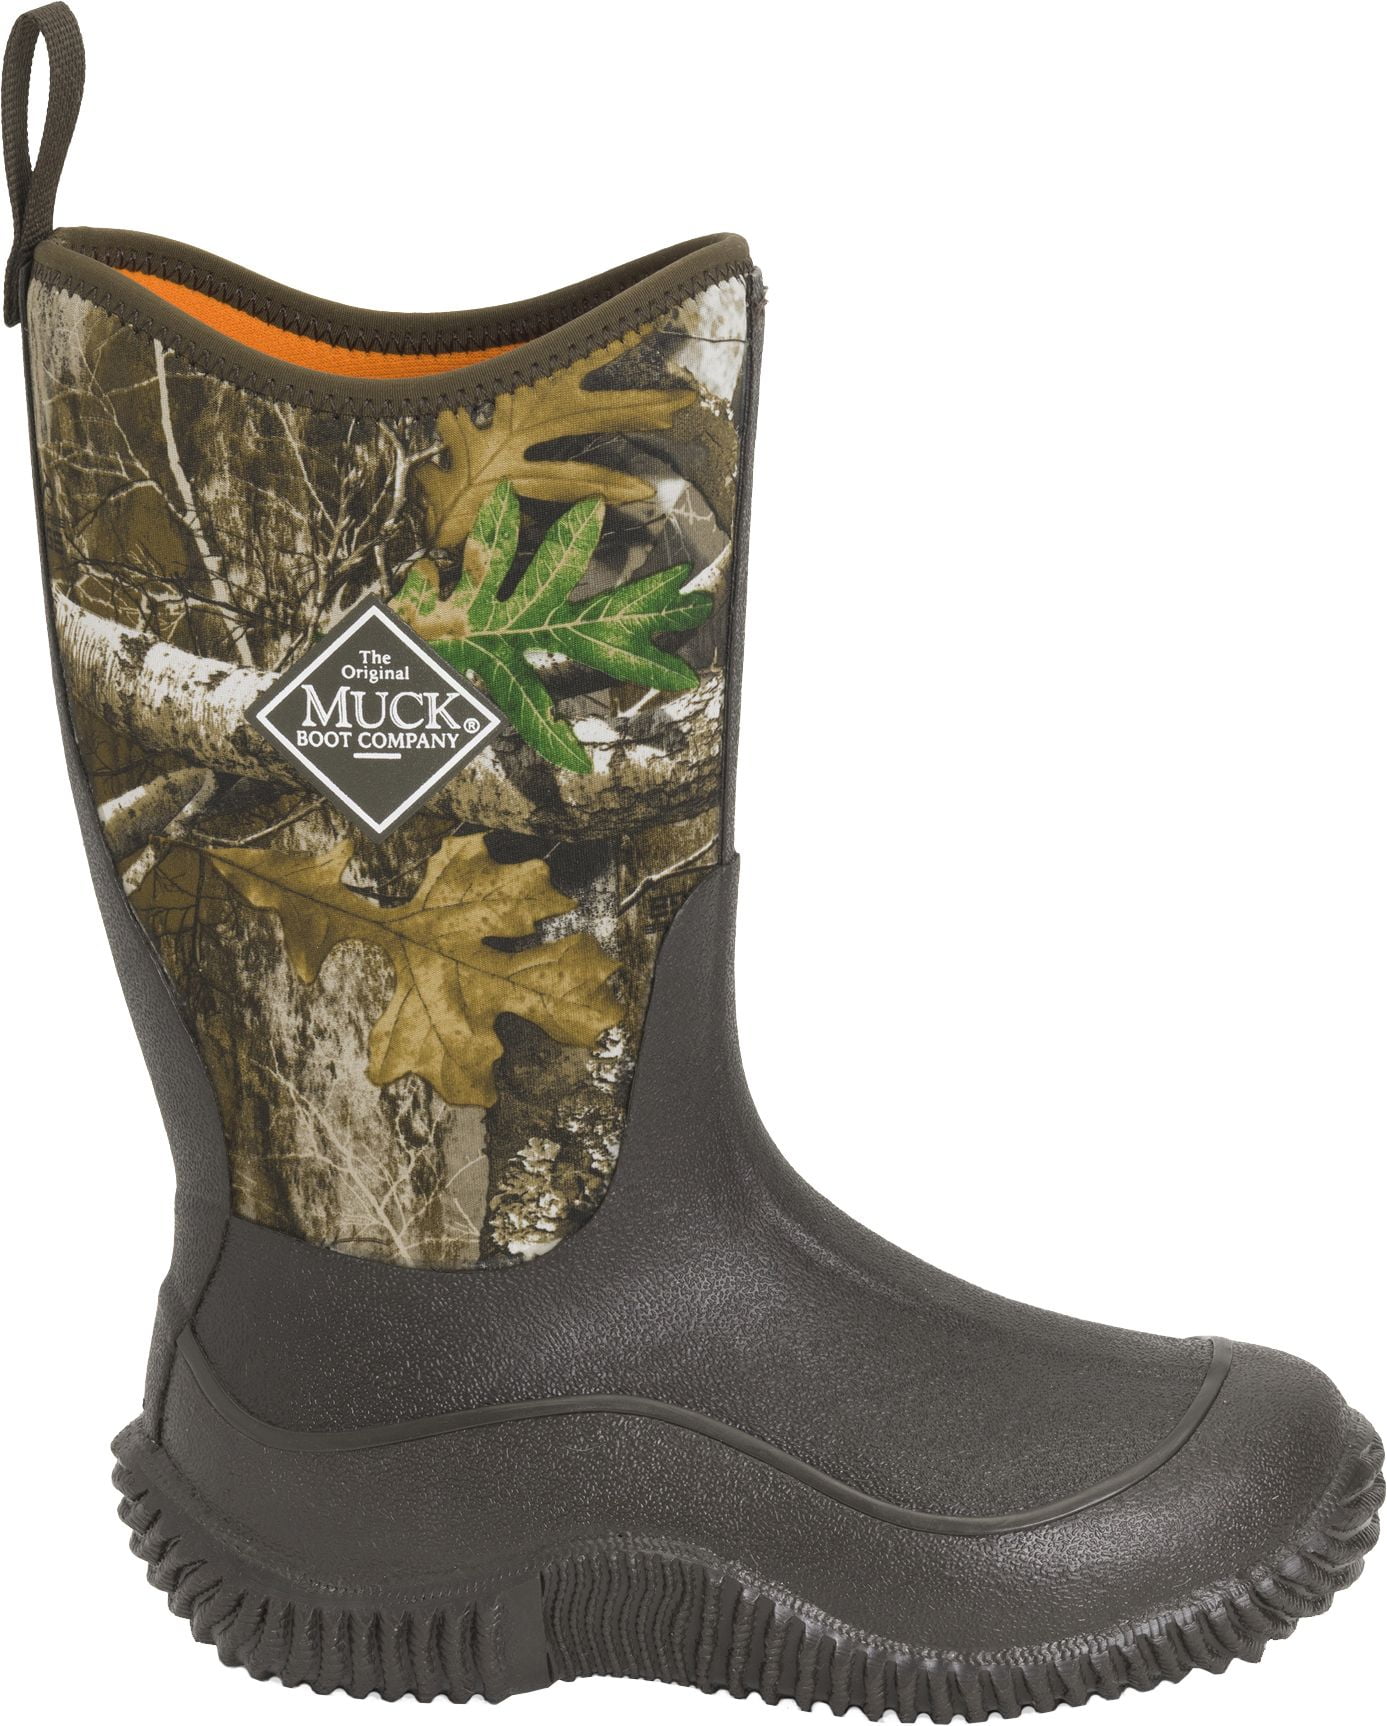 Muck Boot Company - Muck Boots Kids' Hale Realtree Edge Rubber Hunting ...